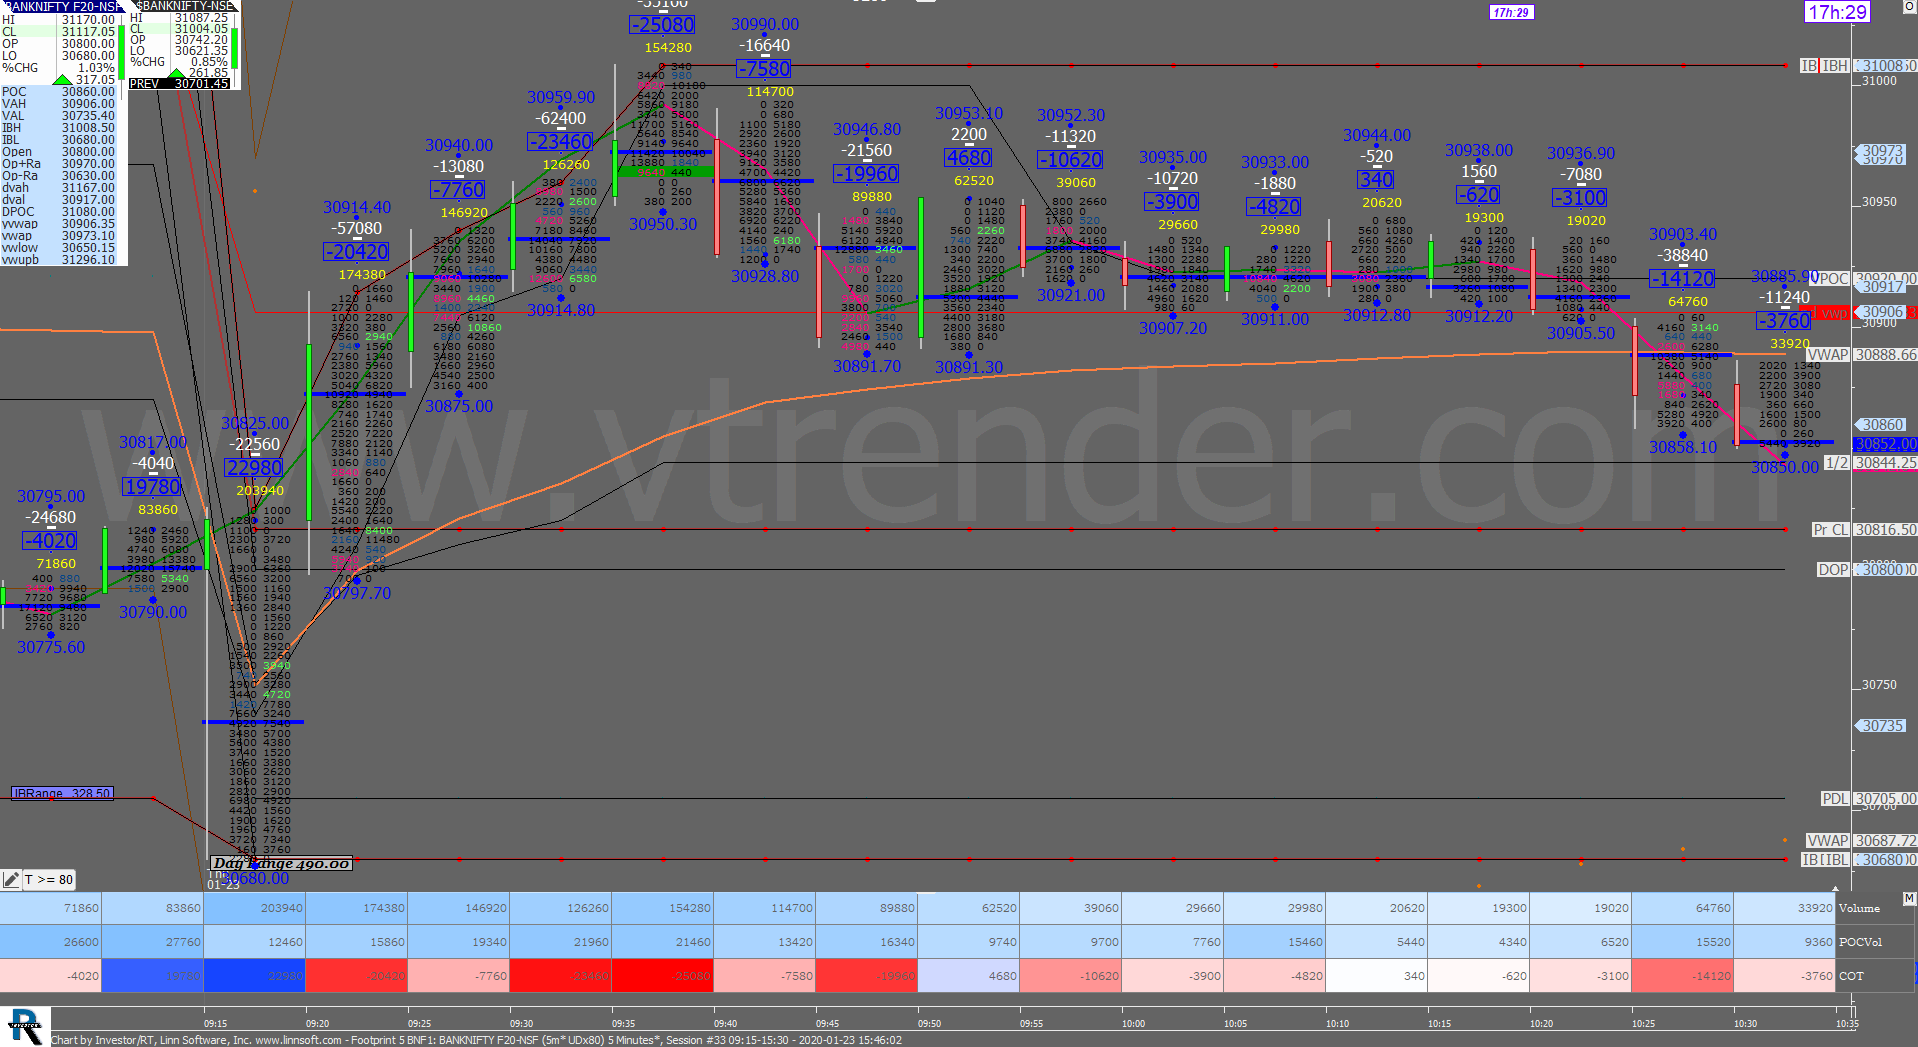 1 30 Order Flow Charts Dated 23Rd Jan 2020 (5 Mins) Banknifty Futures, Day Trading, Intraday Trading, Intraday Trading Strategies, Nifty Futures, Order Flow Analysis, Support And Resistance, Trading Strategies, Volume Profile Trading